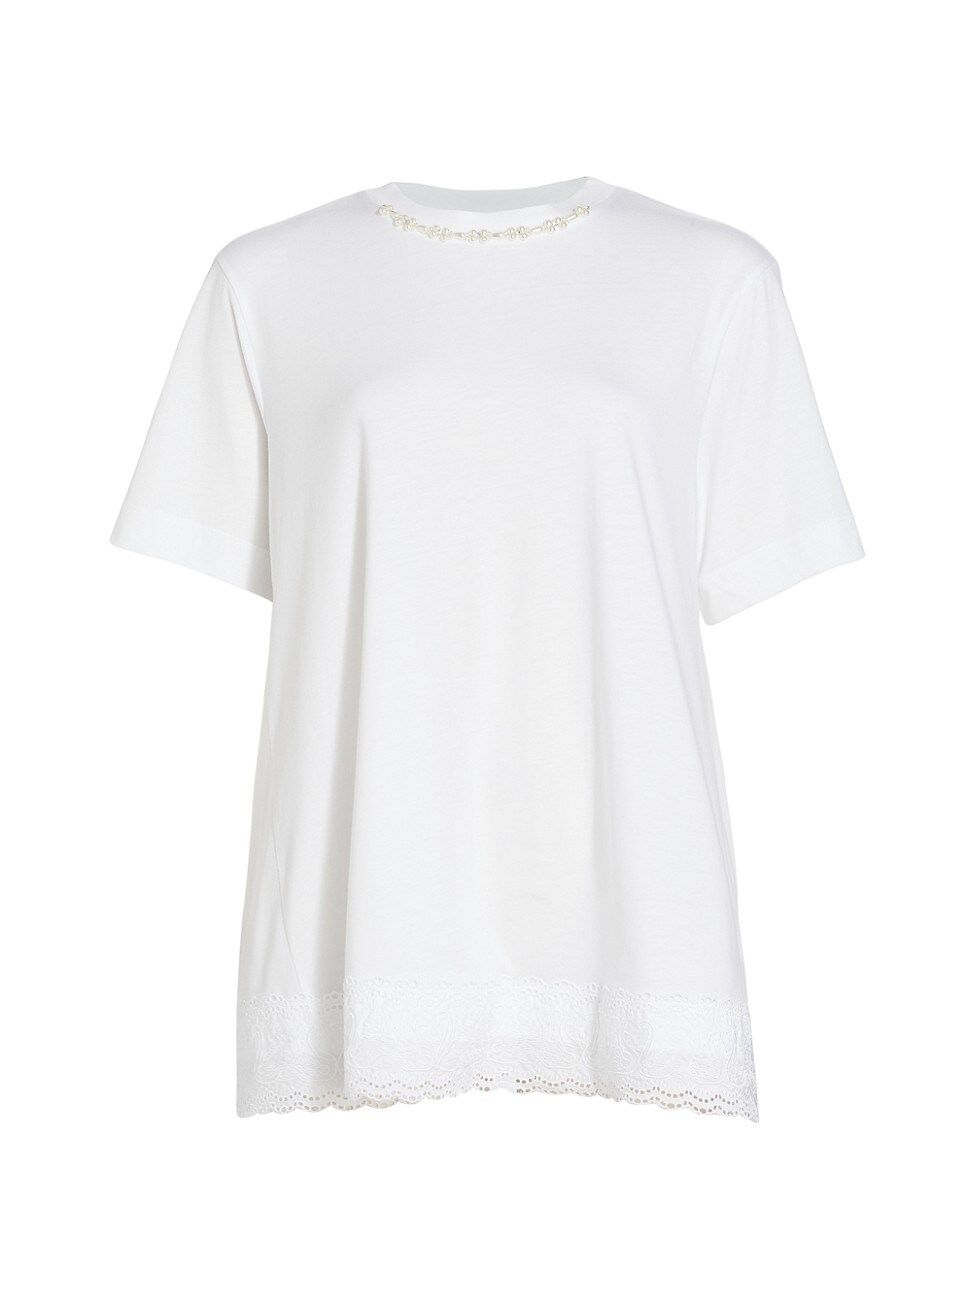 Beaded Jersey & Lace T-Shirt | Saks Fifth Avenue